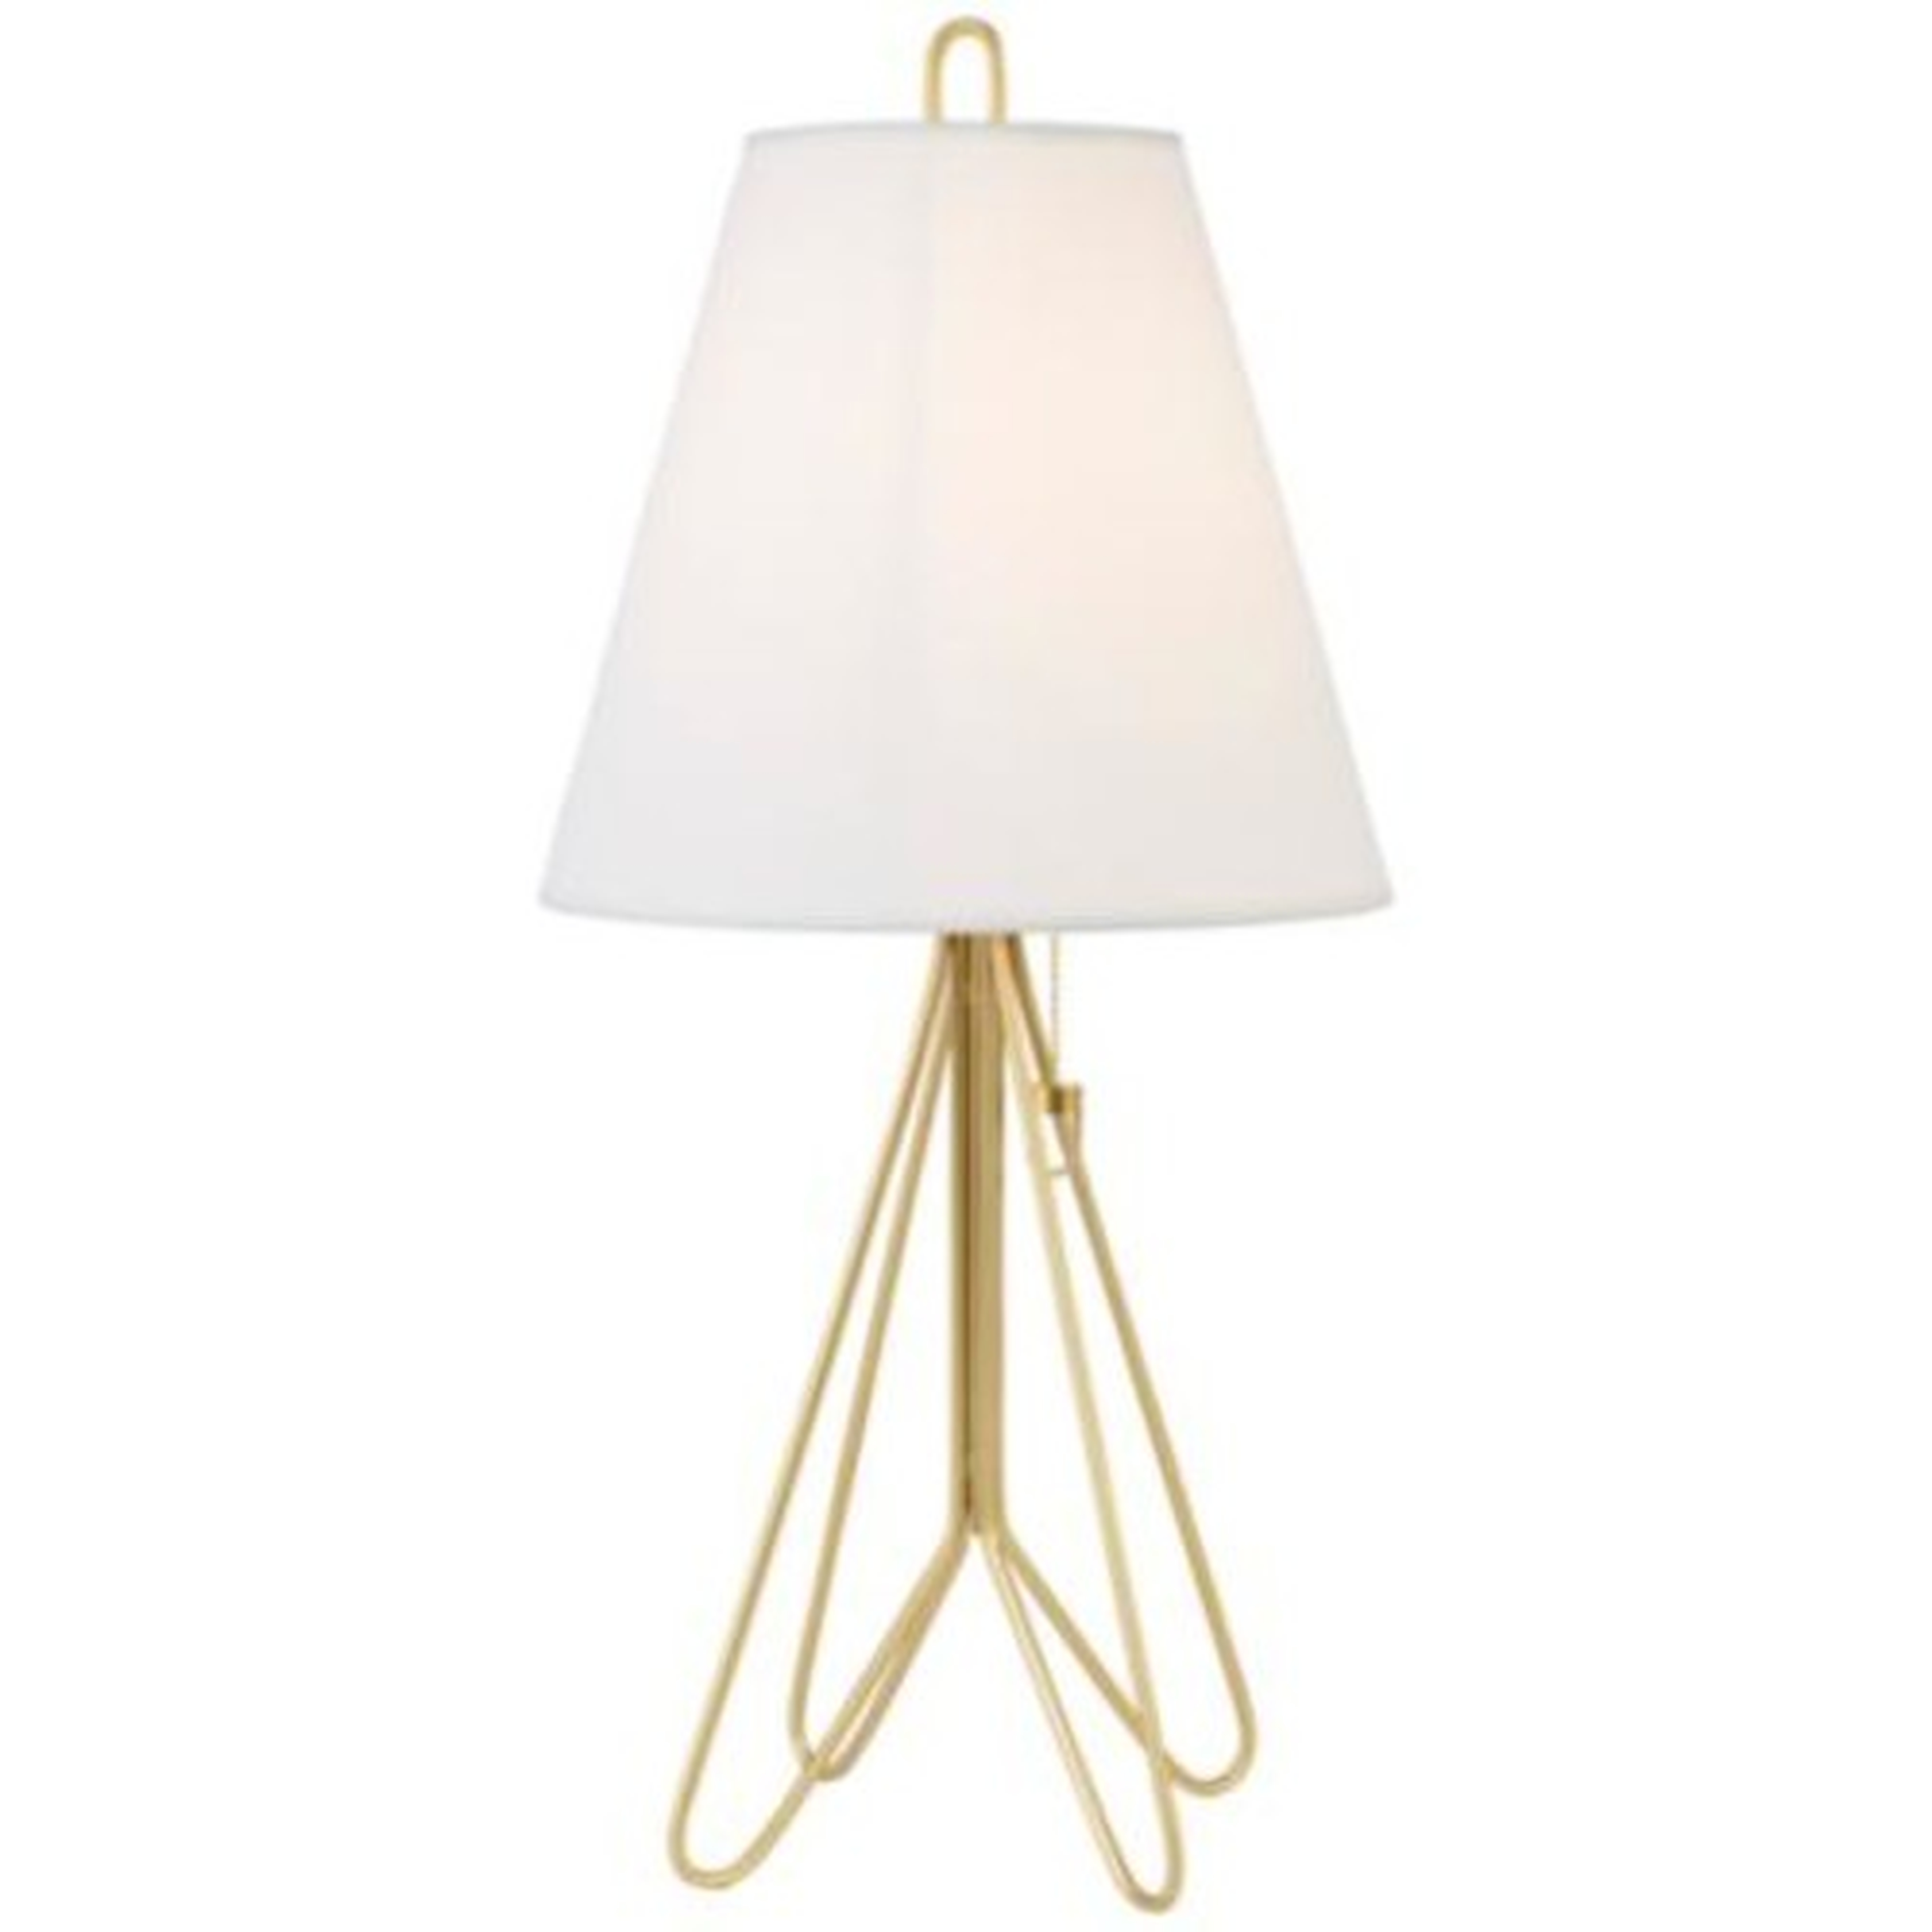 Lights Up! Flight Gold Table Lamp with White Linen Shade - Lamps Plus